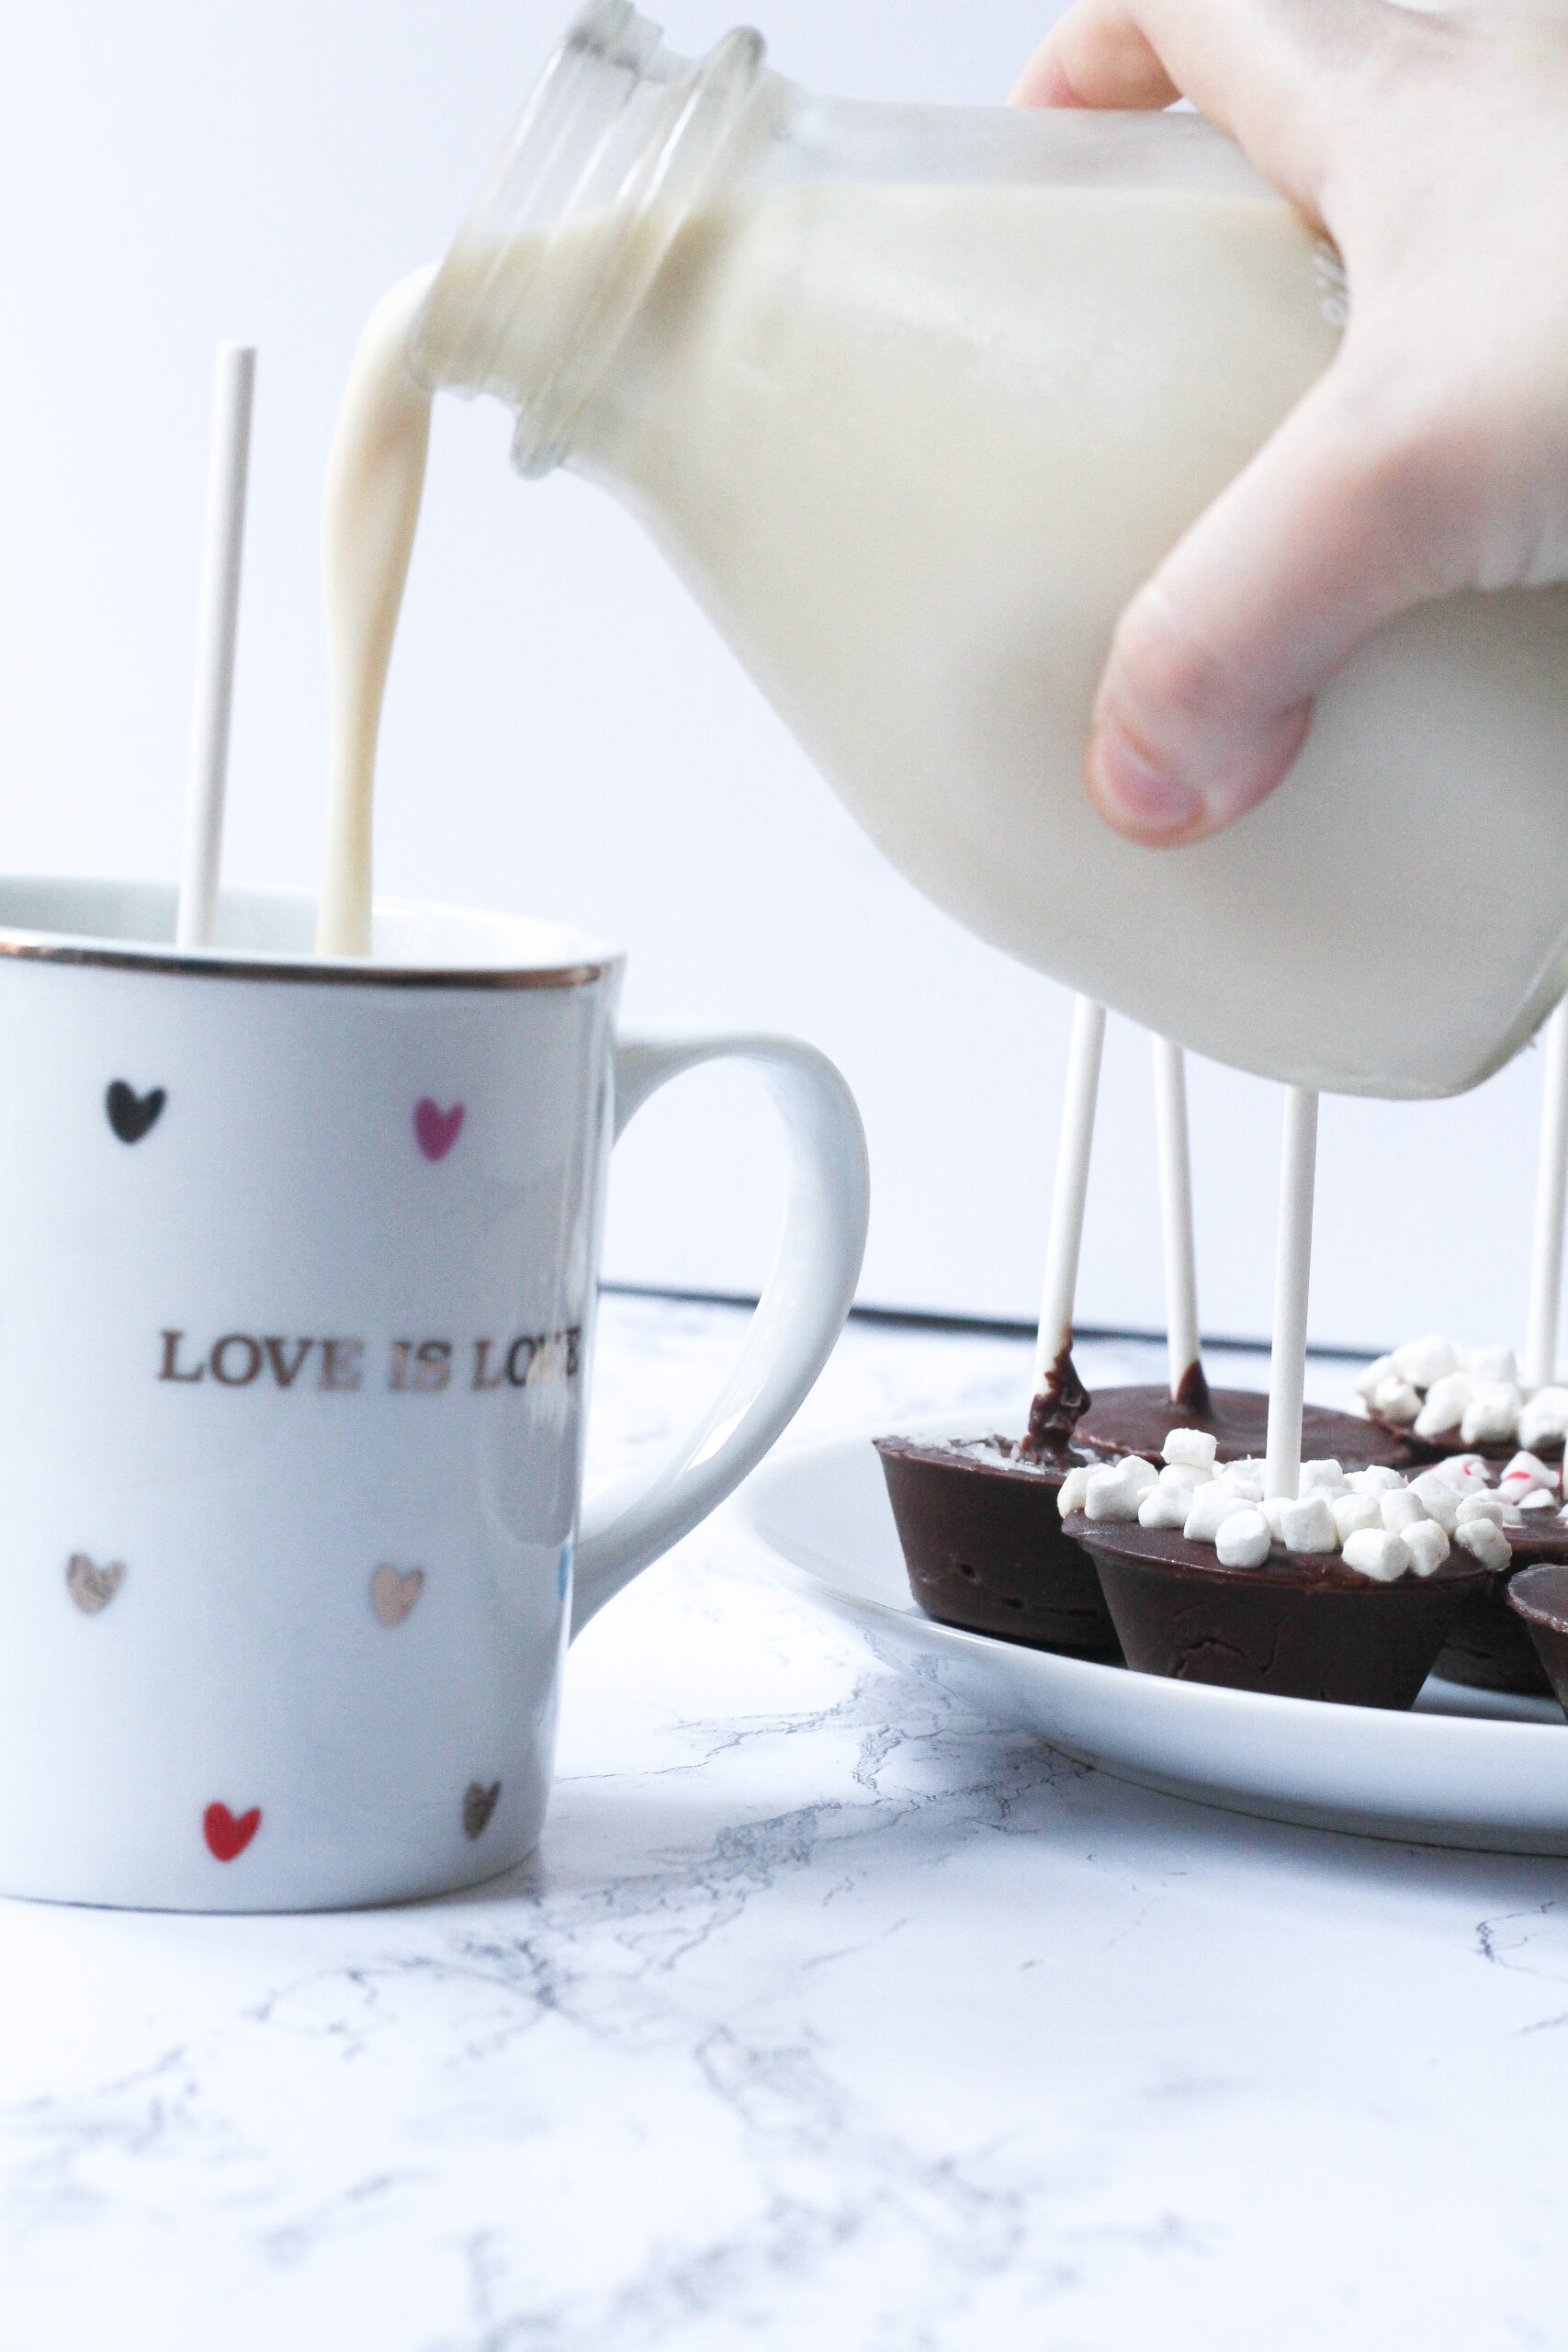 A white mug covered in multi-colored hearts that says Love is Love with a stick coming out of the top of the mug (the Nutella hot chocolate on a stick is in the mug, but you can't actually see the chocolate). coming in from the right side of the frame is a hand holding a glass jar of milk and pouring the milk into the mug. Beneath the jar on the right side of the frame is a plate of nutella hot chocolates on sticks, with the plate cut off on the right side of the frame. The most visible hot chocolate stick has mini marshmallows covering the top of the chocolate.